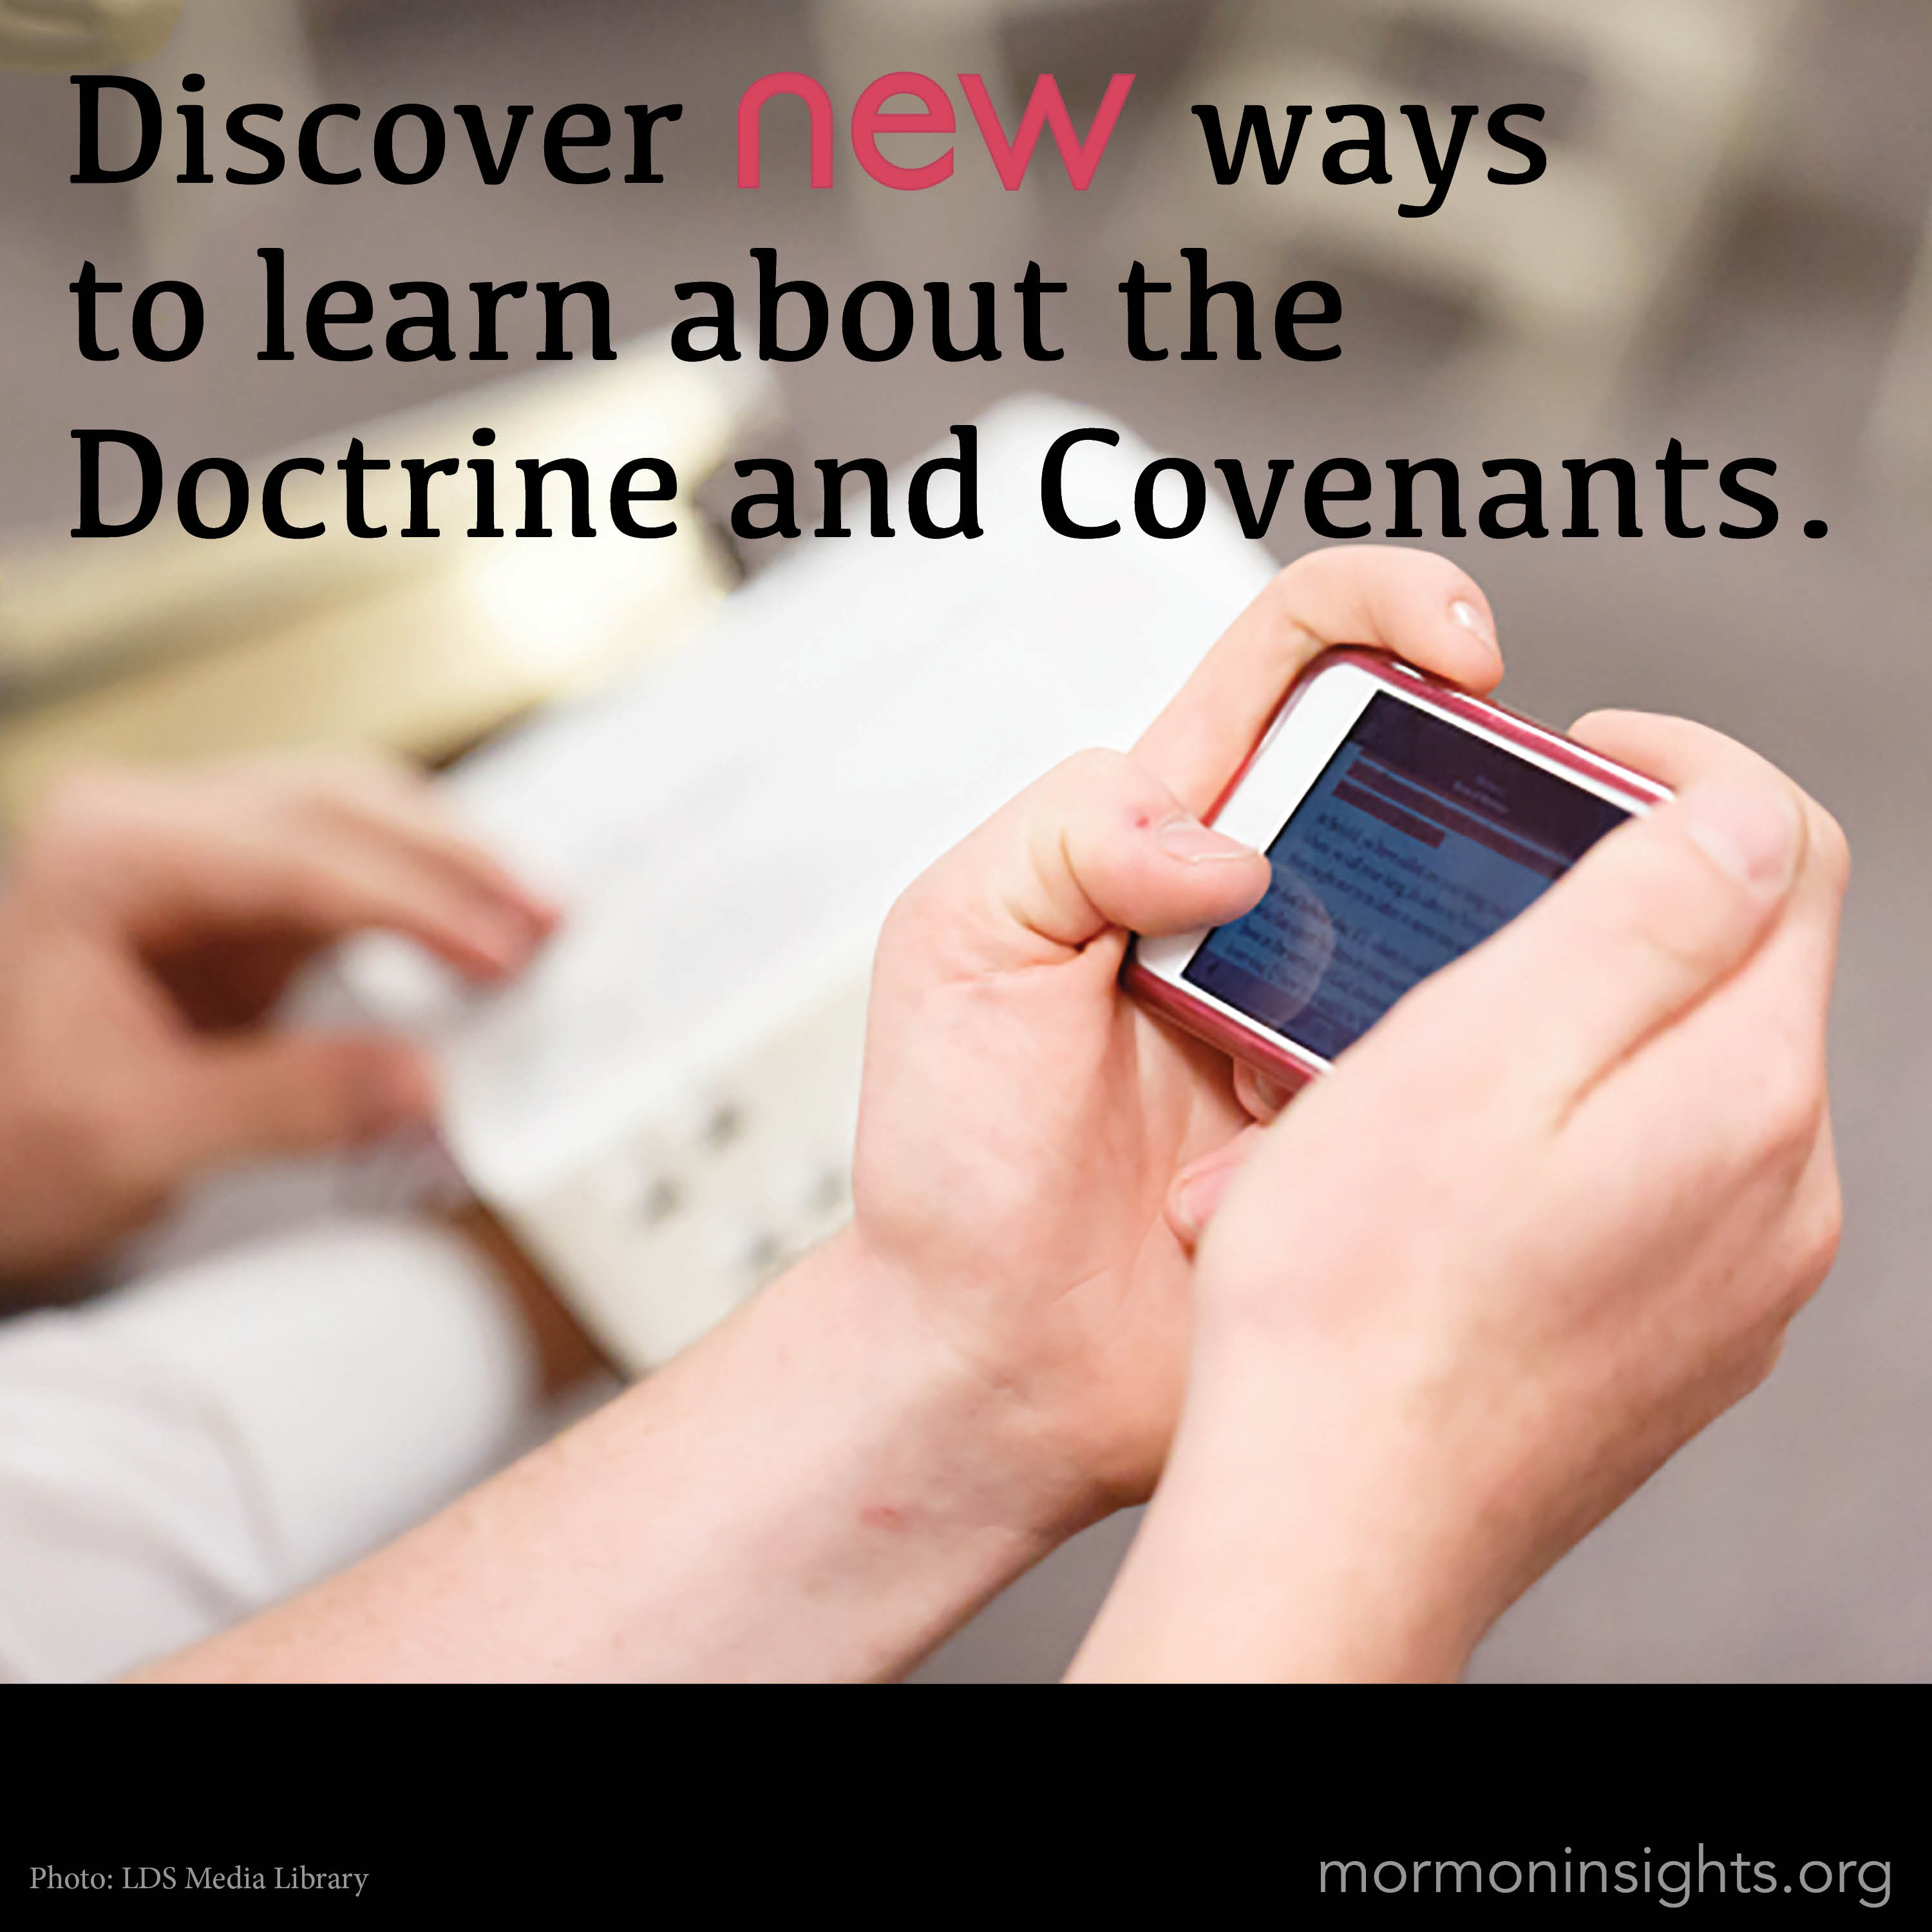 Doctrine and Covanents